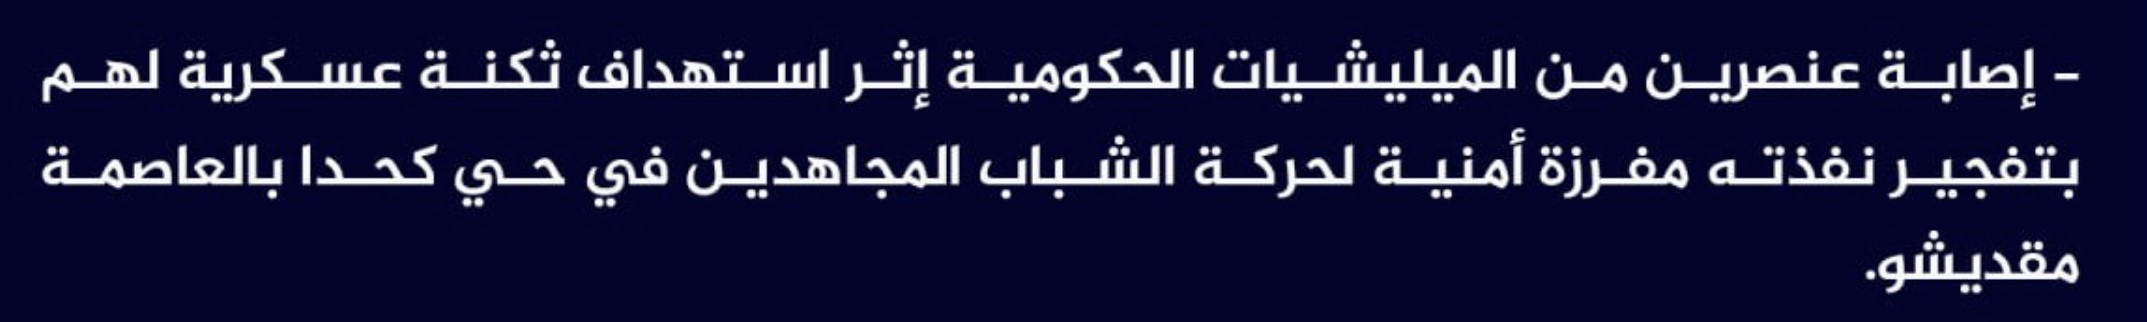 (Claim) al-Shabaab Injured Two Somalian Forces in an IED Attack on a Military Base in Kahda District, Mogadishu, Somalia - 27 September 2023